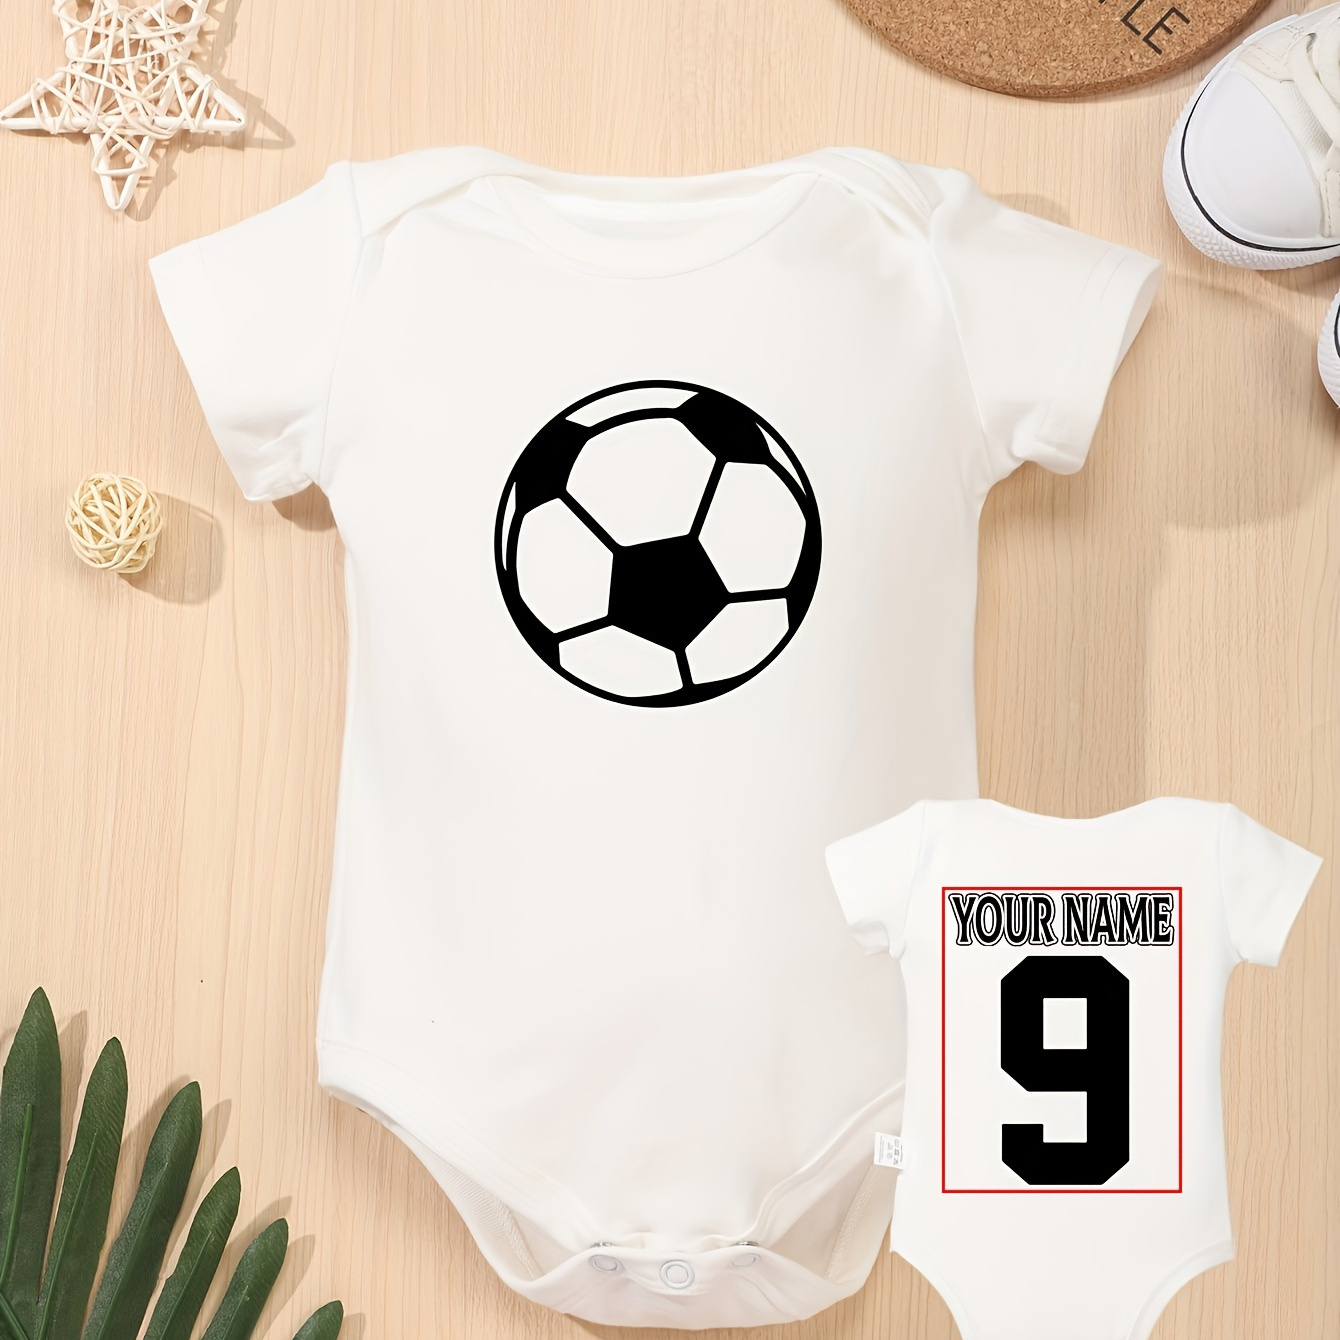 

Football Name & Number Sports Style Customized Clothing Comfortable Versatile Baby Short Sleeve Onesie Cozy Soft Romper Jumpsuit